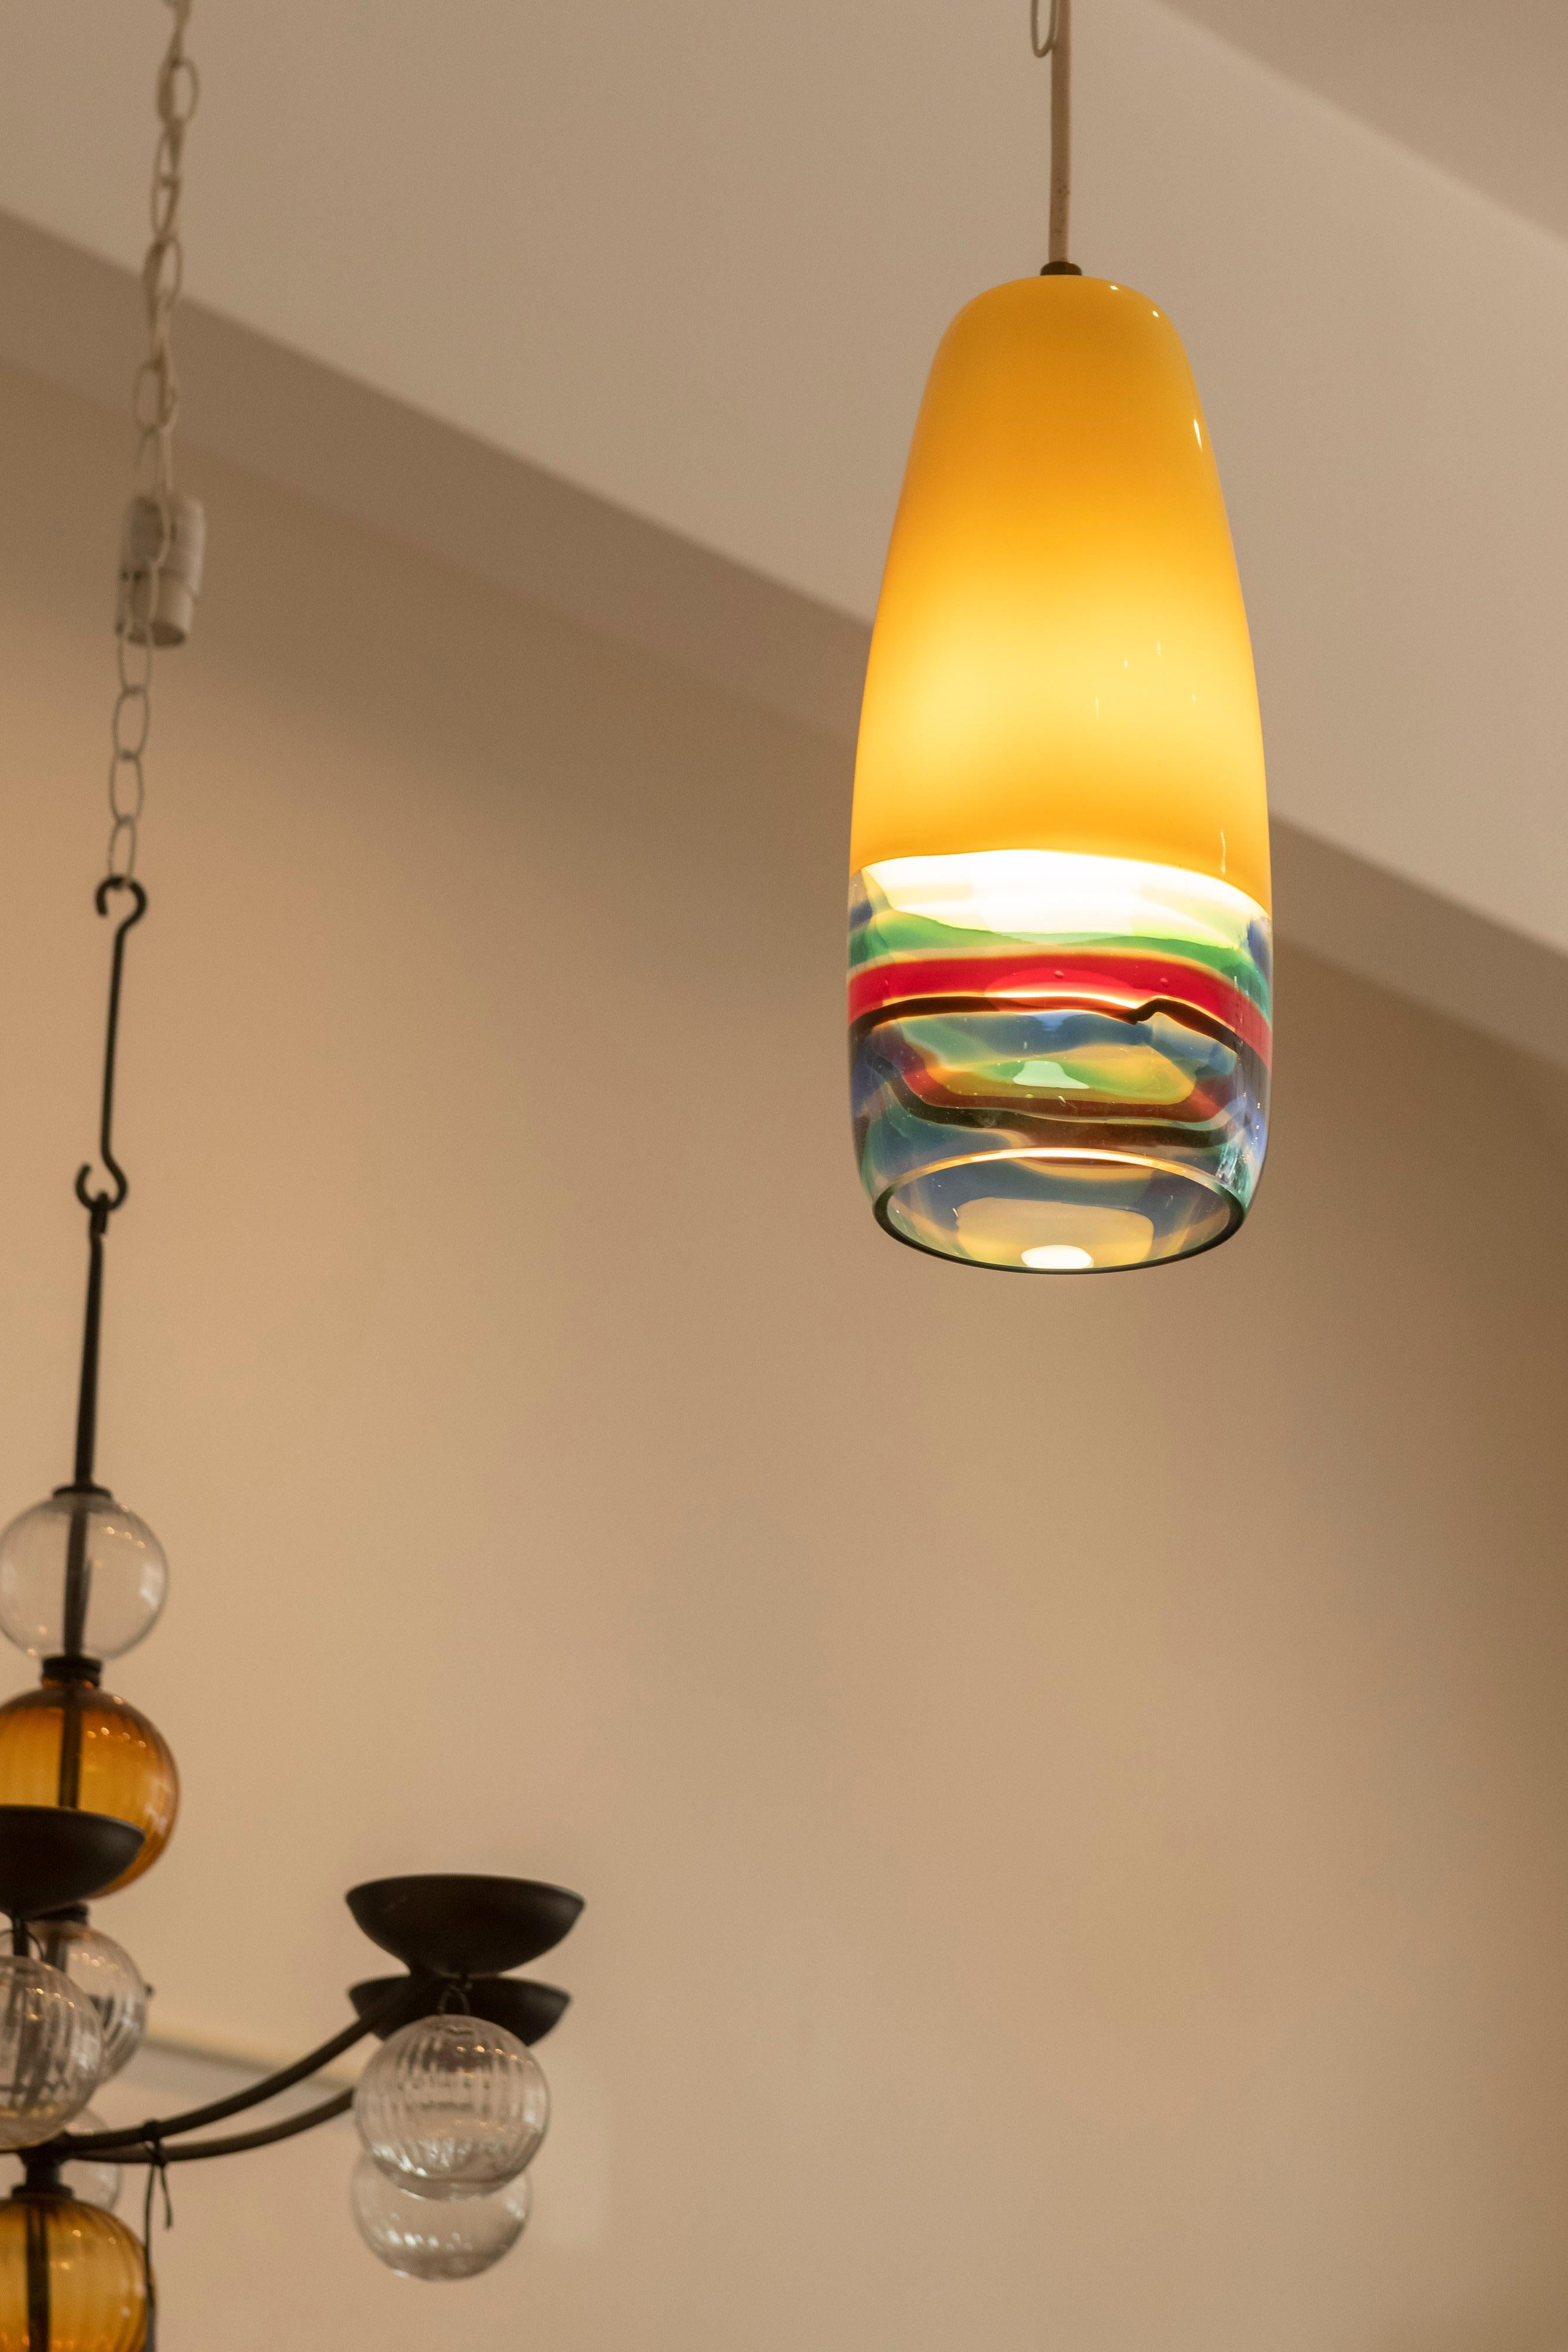 Yellow blown glass pendant lamp with colored bands also known as the 